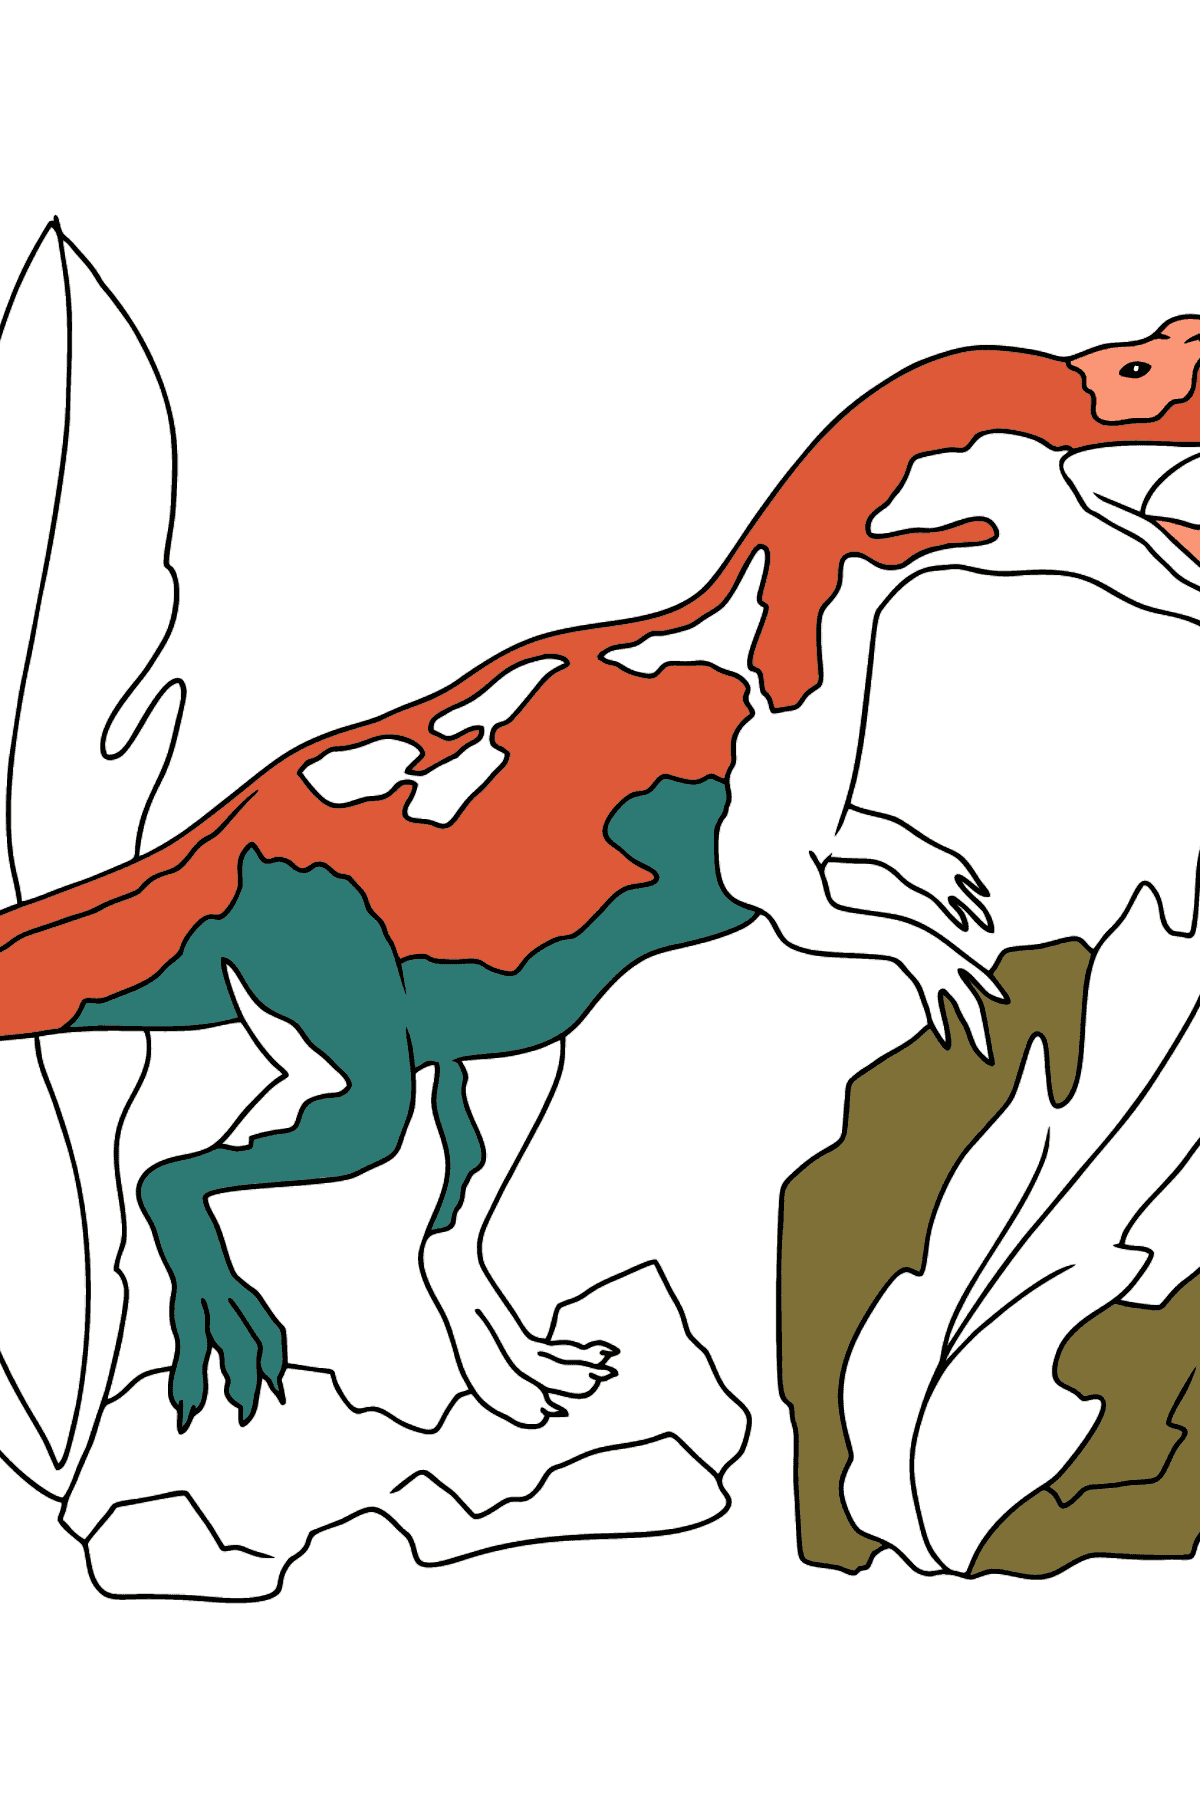 Coloring Page - Allosaurus - Jurassic Dinosaur - Coloring Pages for Kids